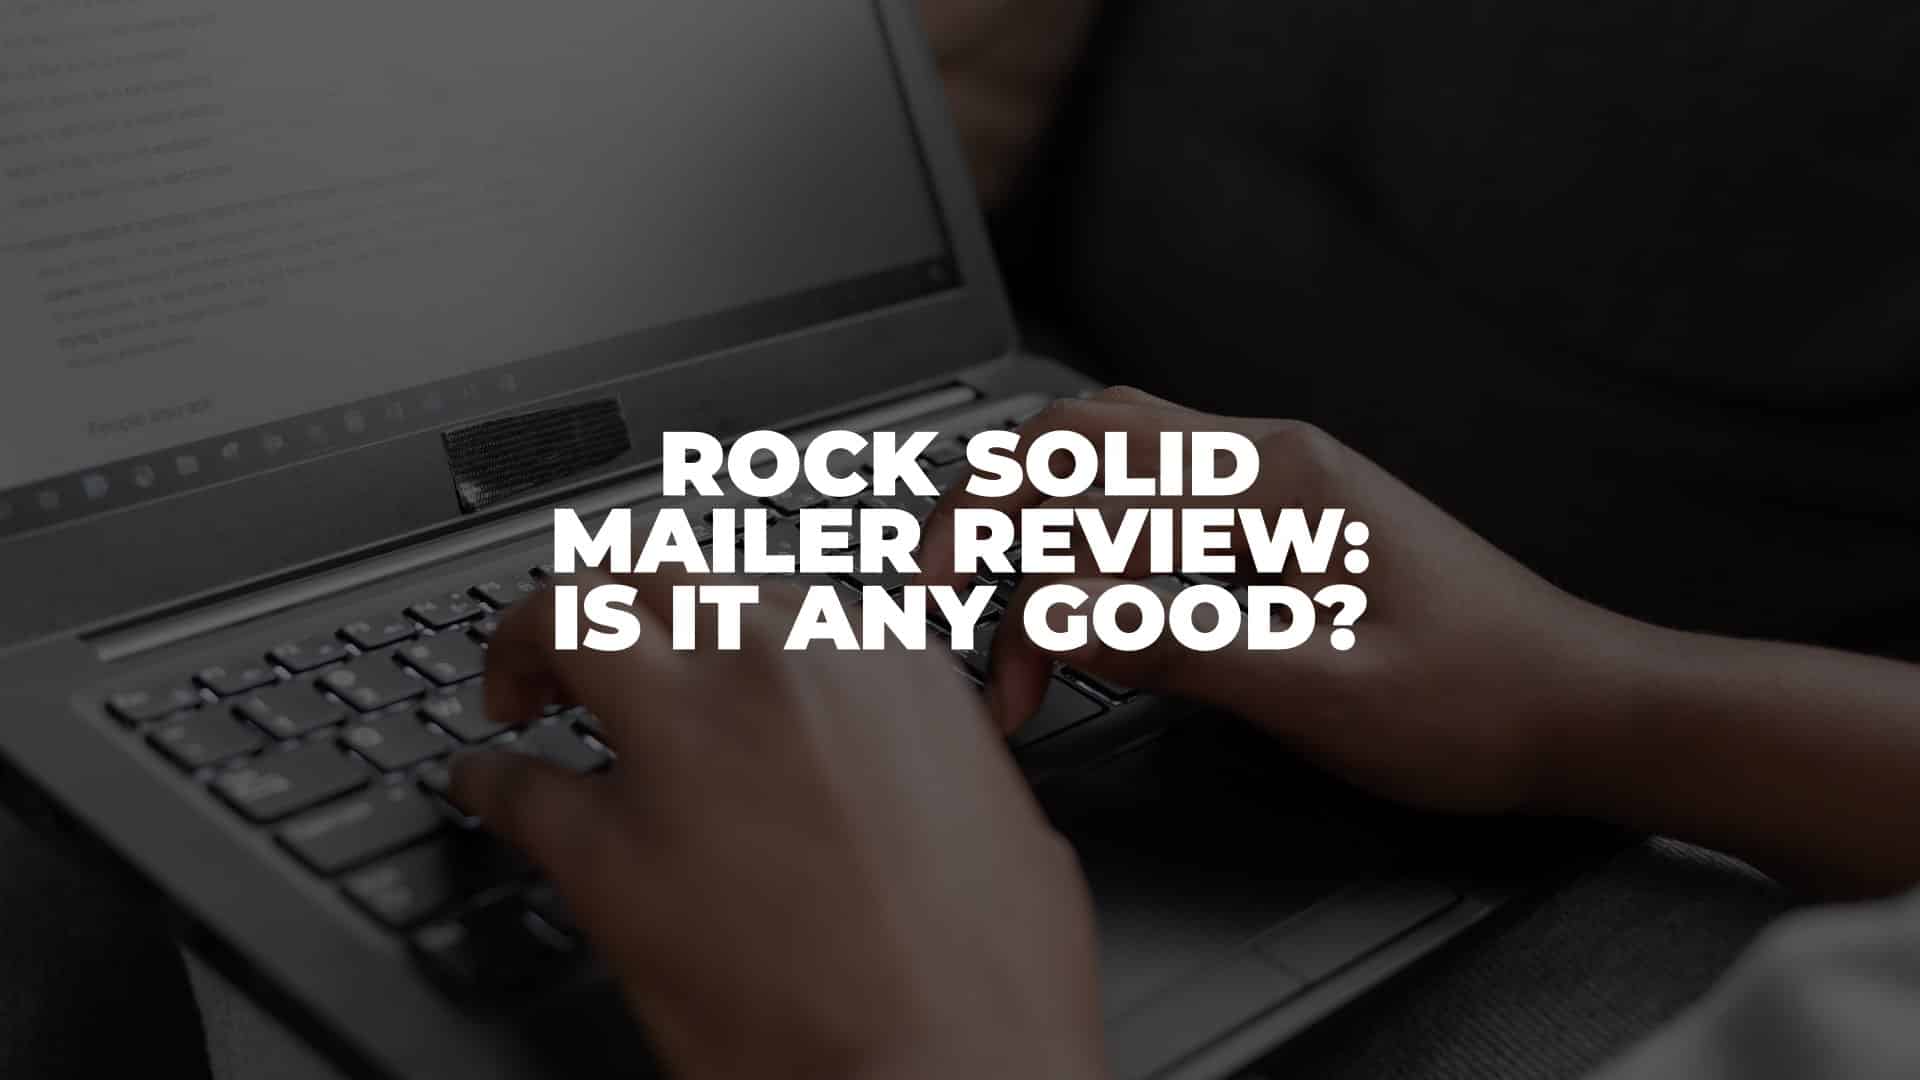 Rock Solid Mailer Review - Featured Image